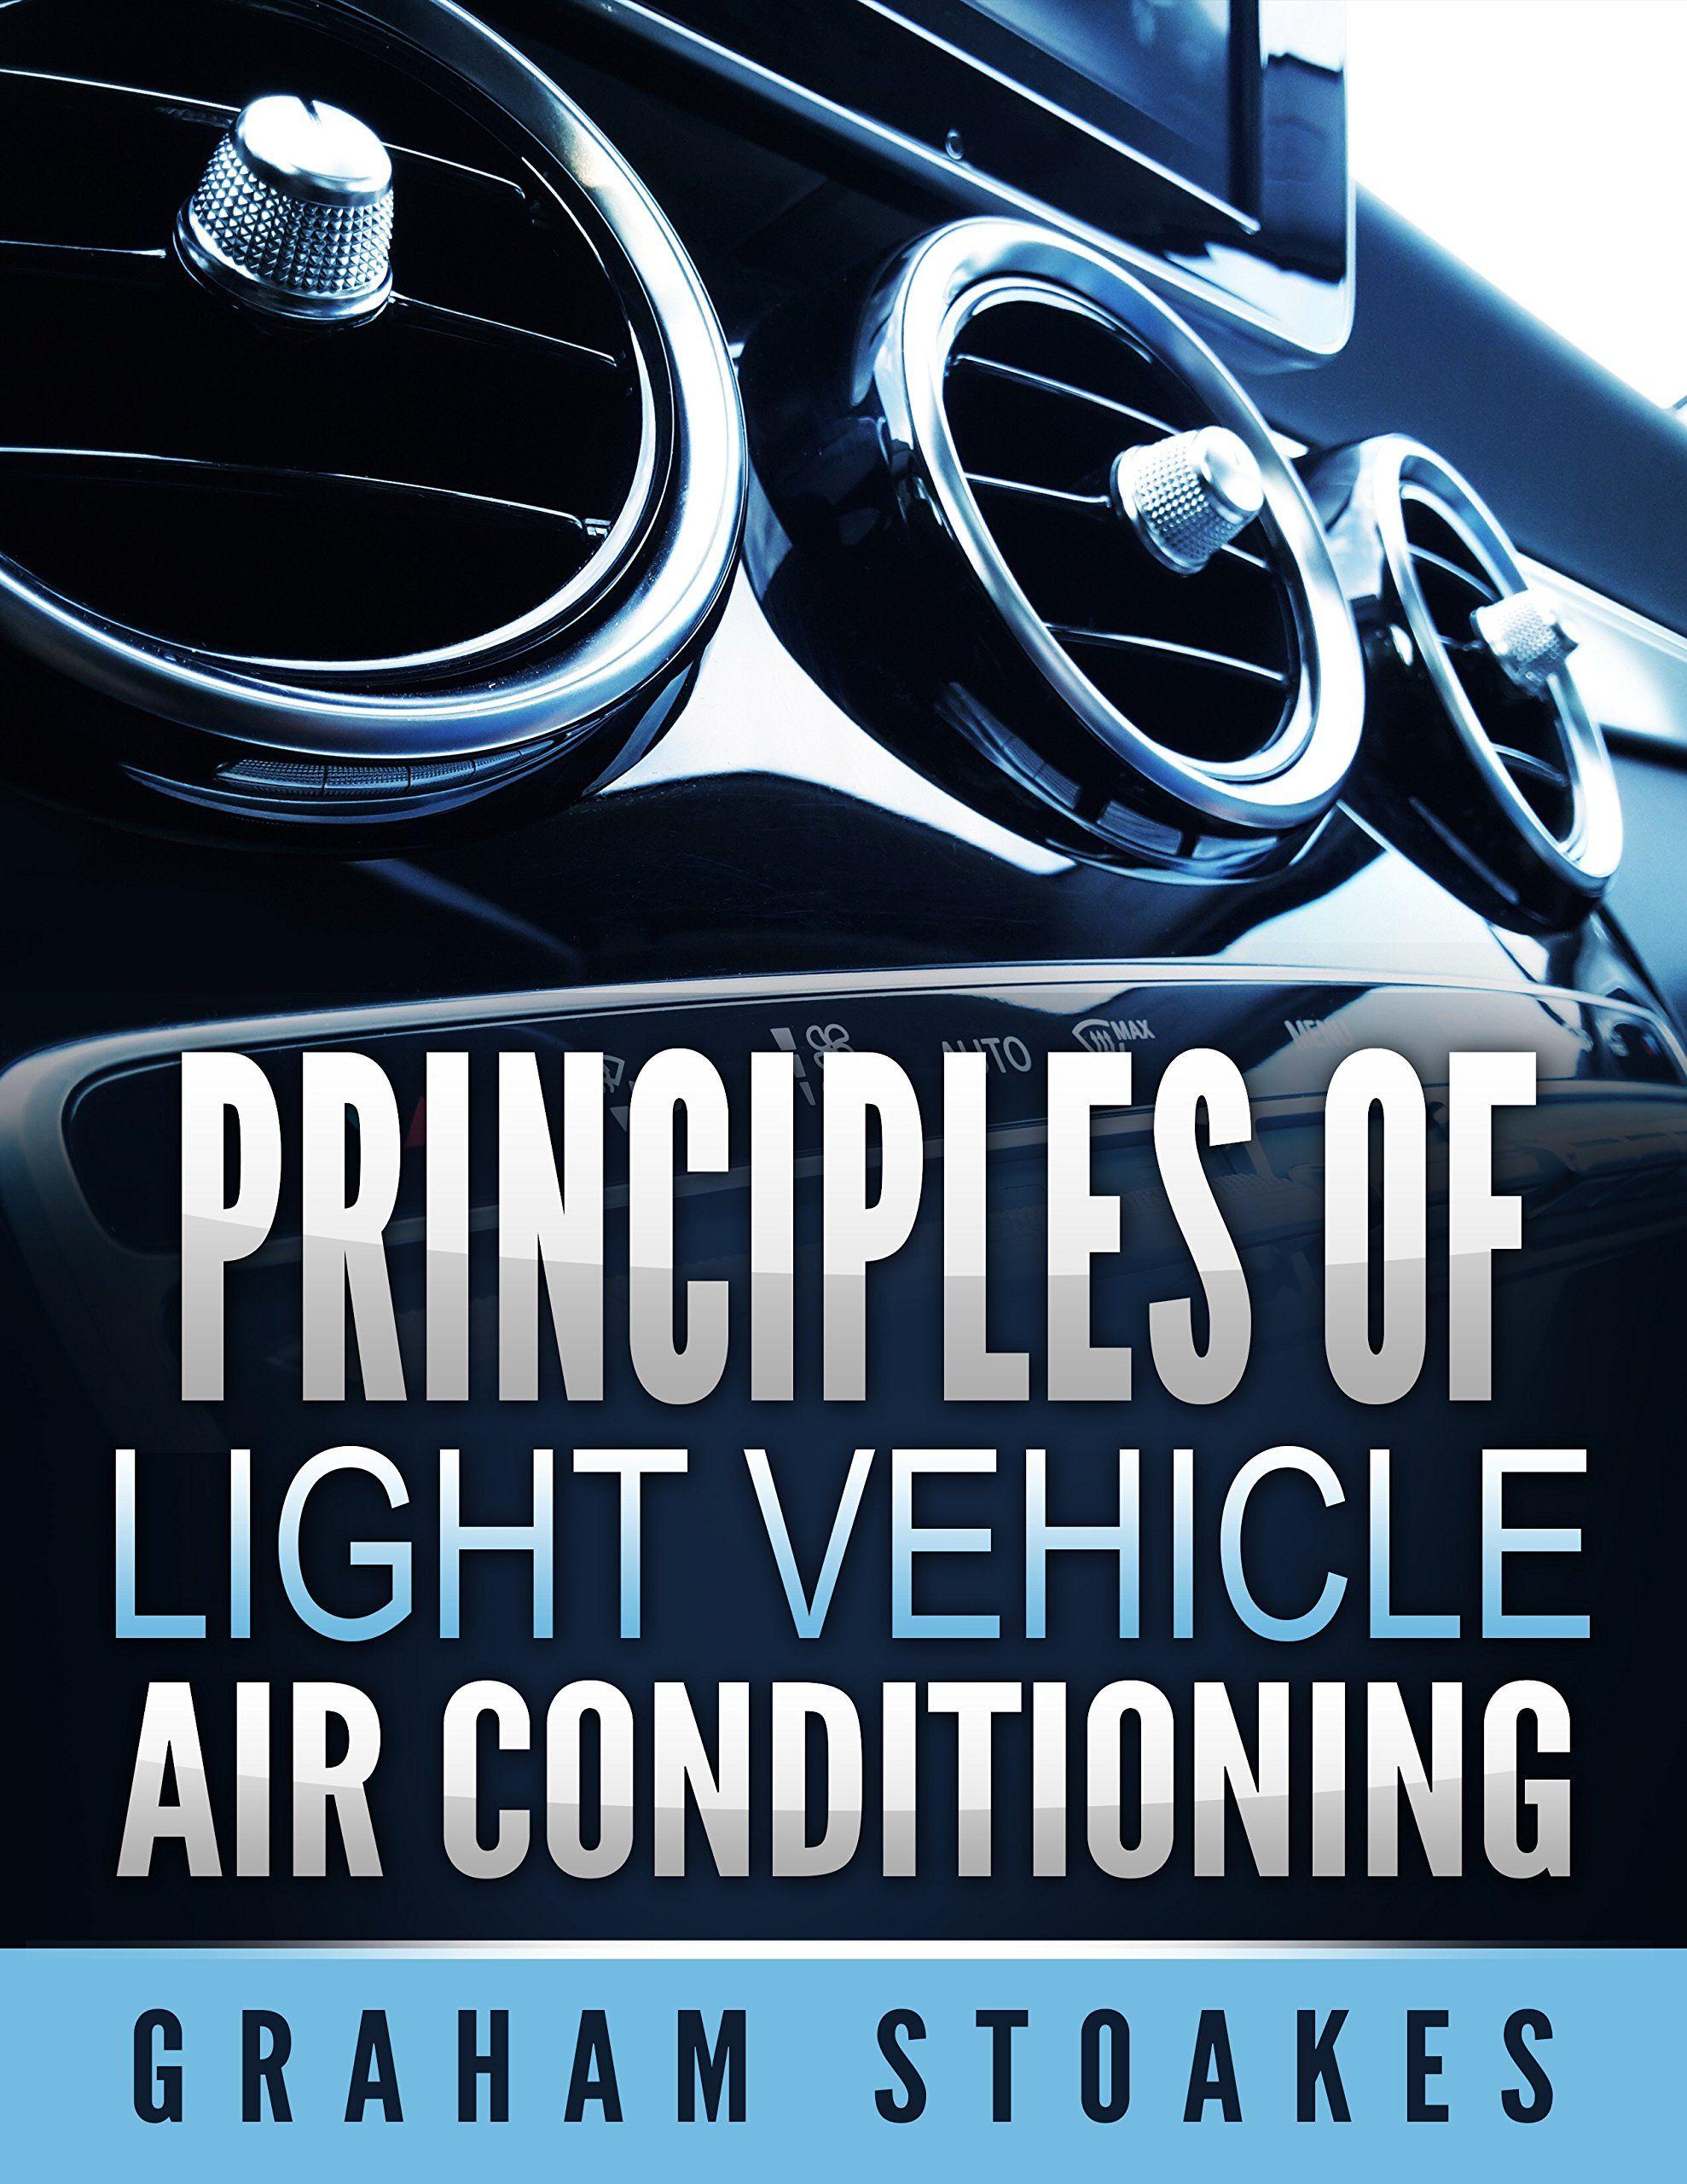 Automotive Air Conditioning Logo - Principles of Light Vehicle Air Conditioning: Amazon.co.uk: Graham